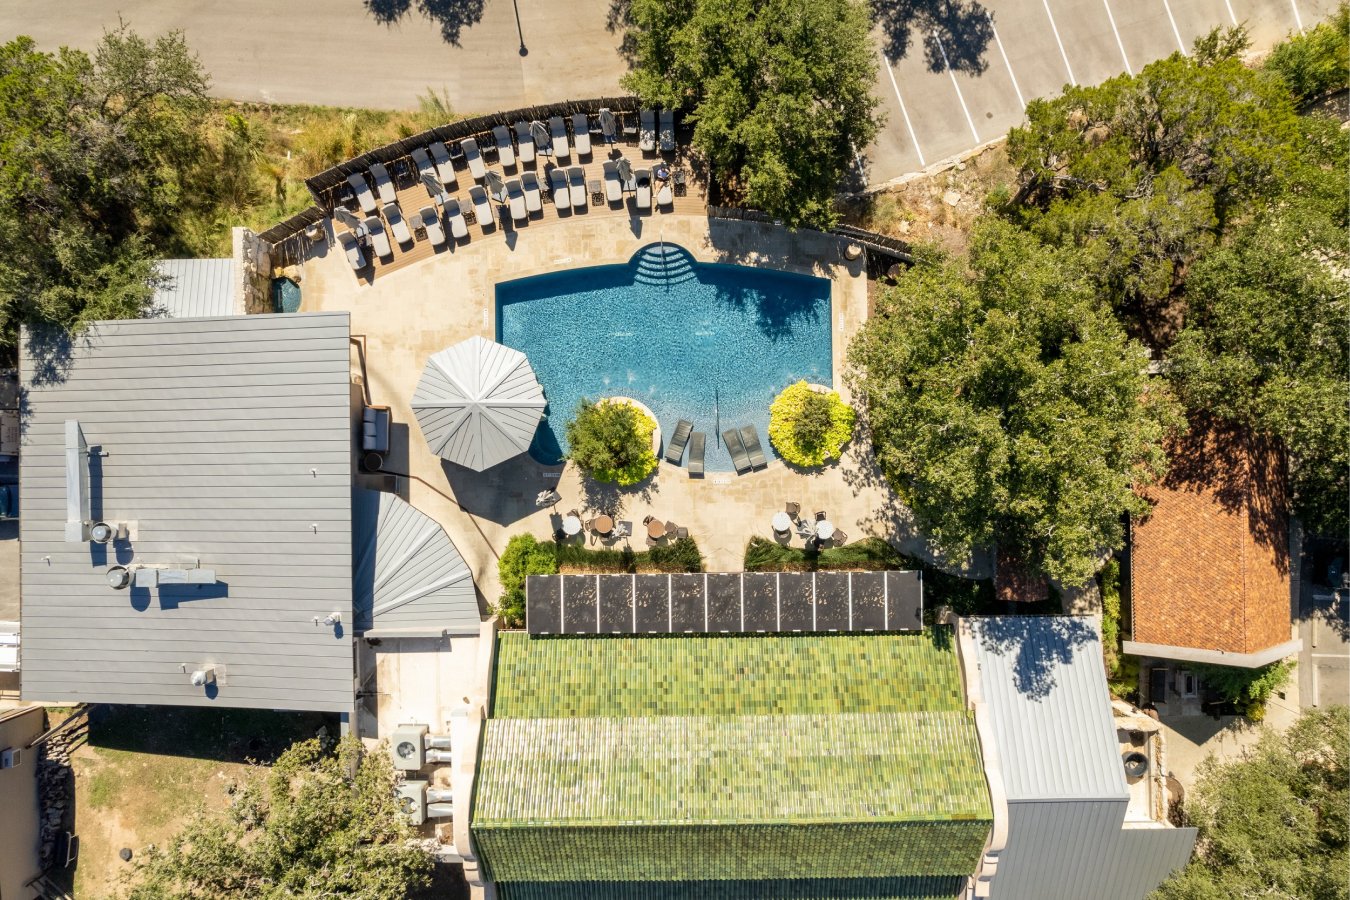 Aerial view of hotel pool and buildings